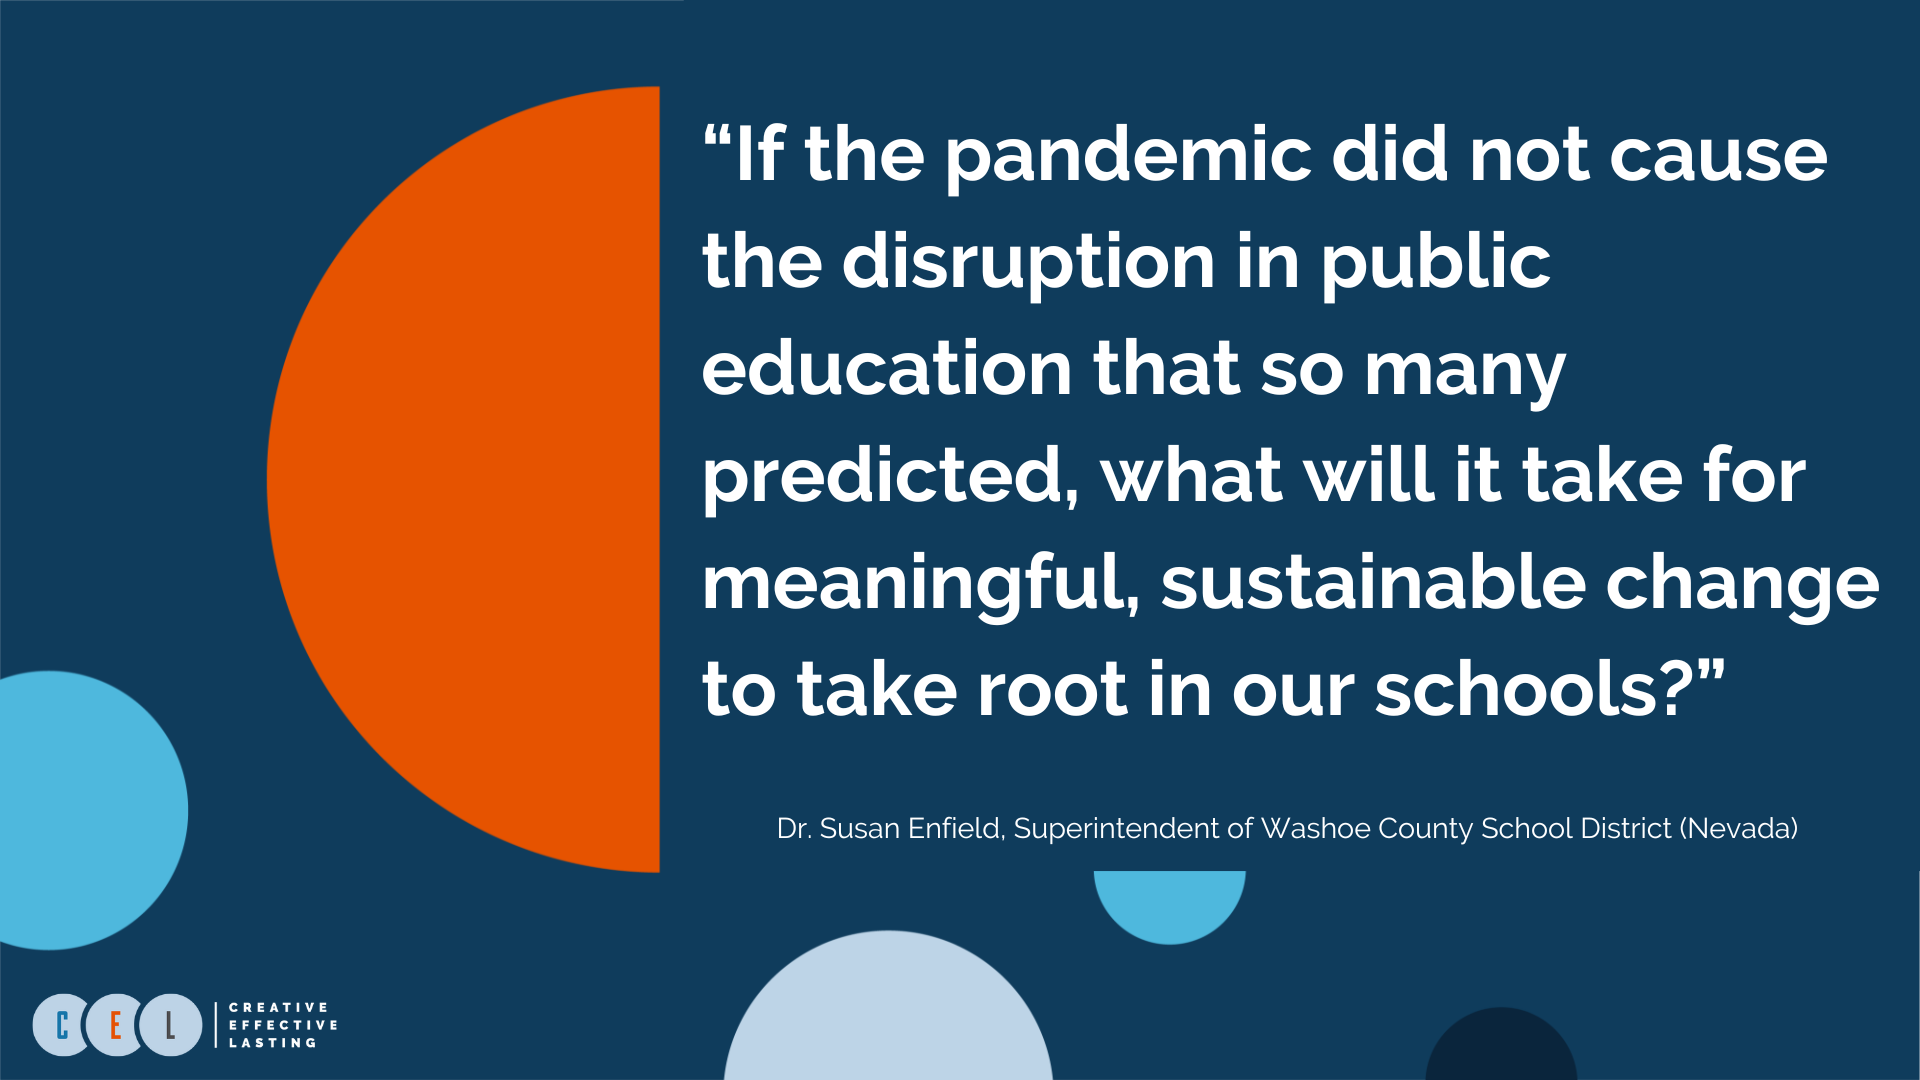 “If the pandemic did not cause the disruption in public education that so many predicted, what will it take for meaningful, sustainable change to take root in our schools?” – Dr. Susan Enfield, Superintendent of Washoe County School District (Nevada)